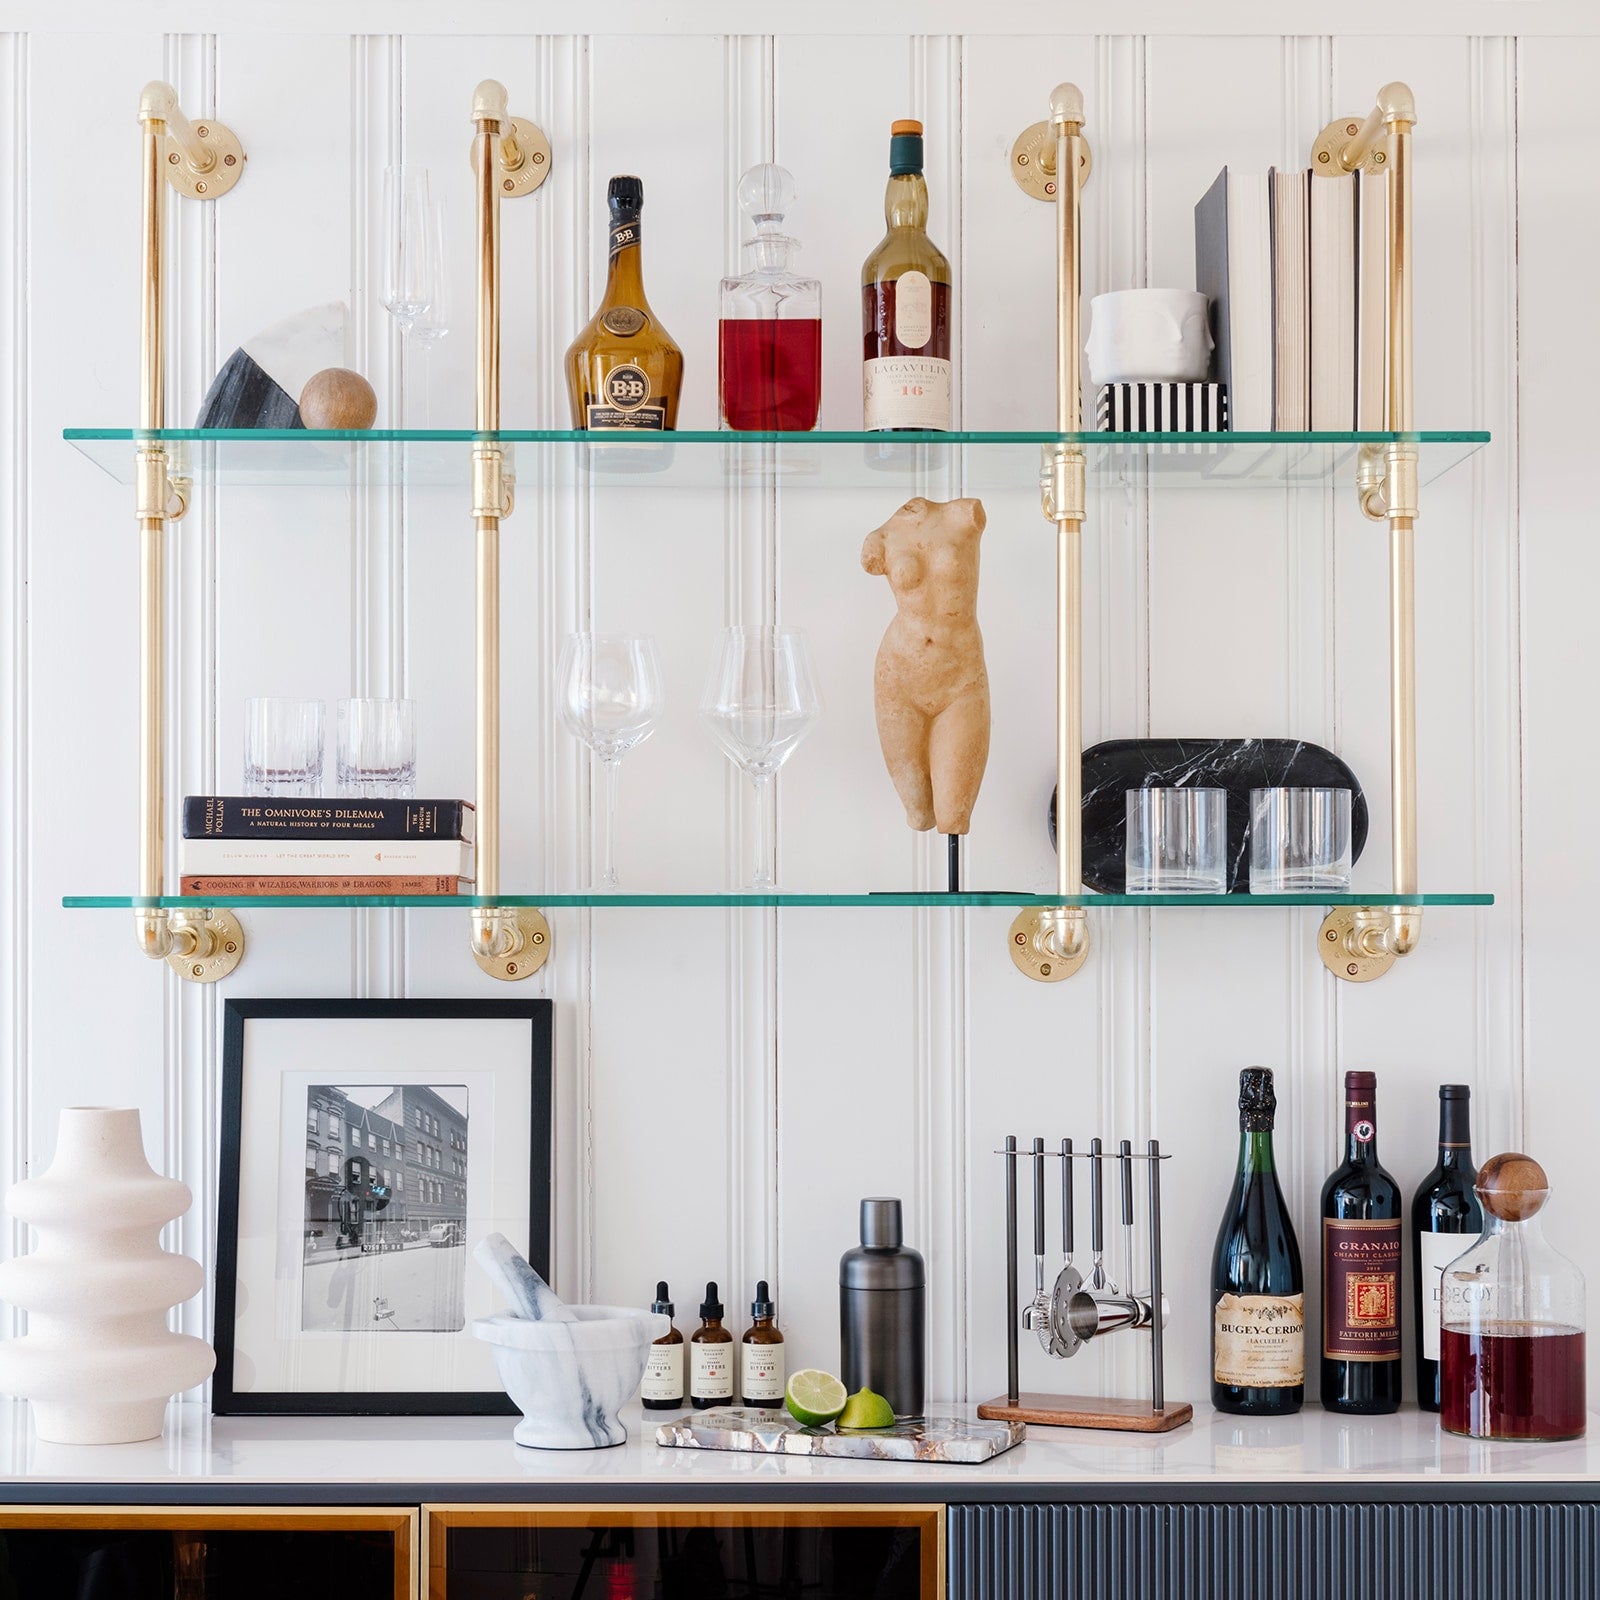 How to Build Open Shelves with Brass Gallery Rail - Oak & Grain Home